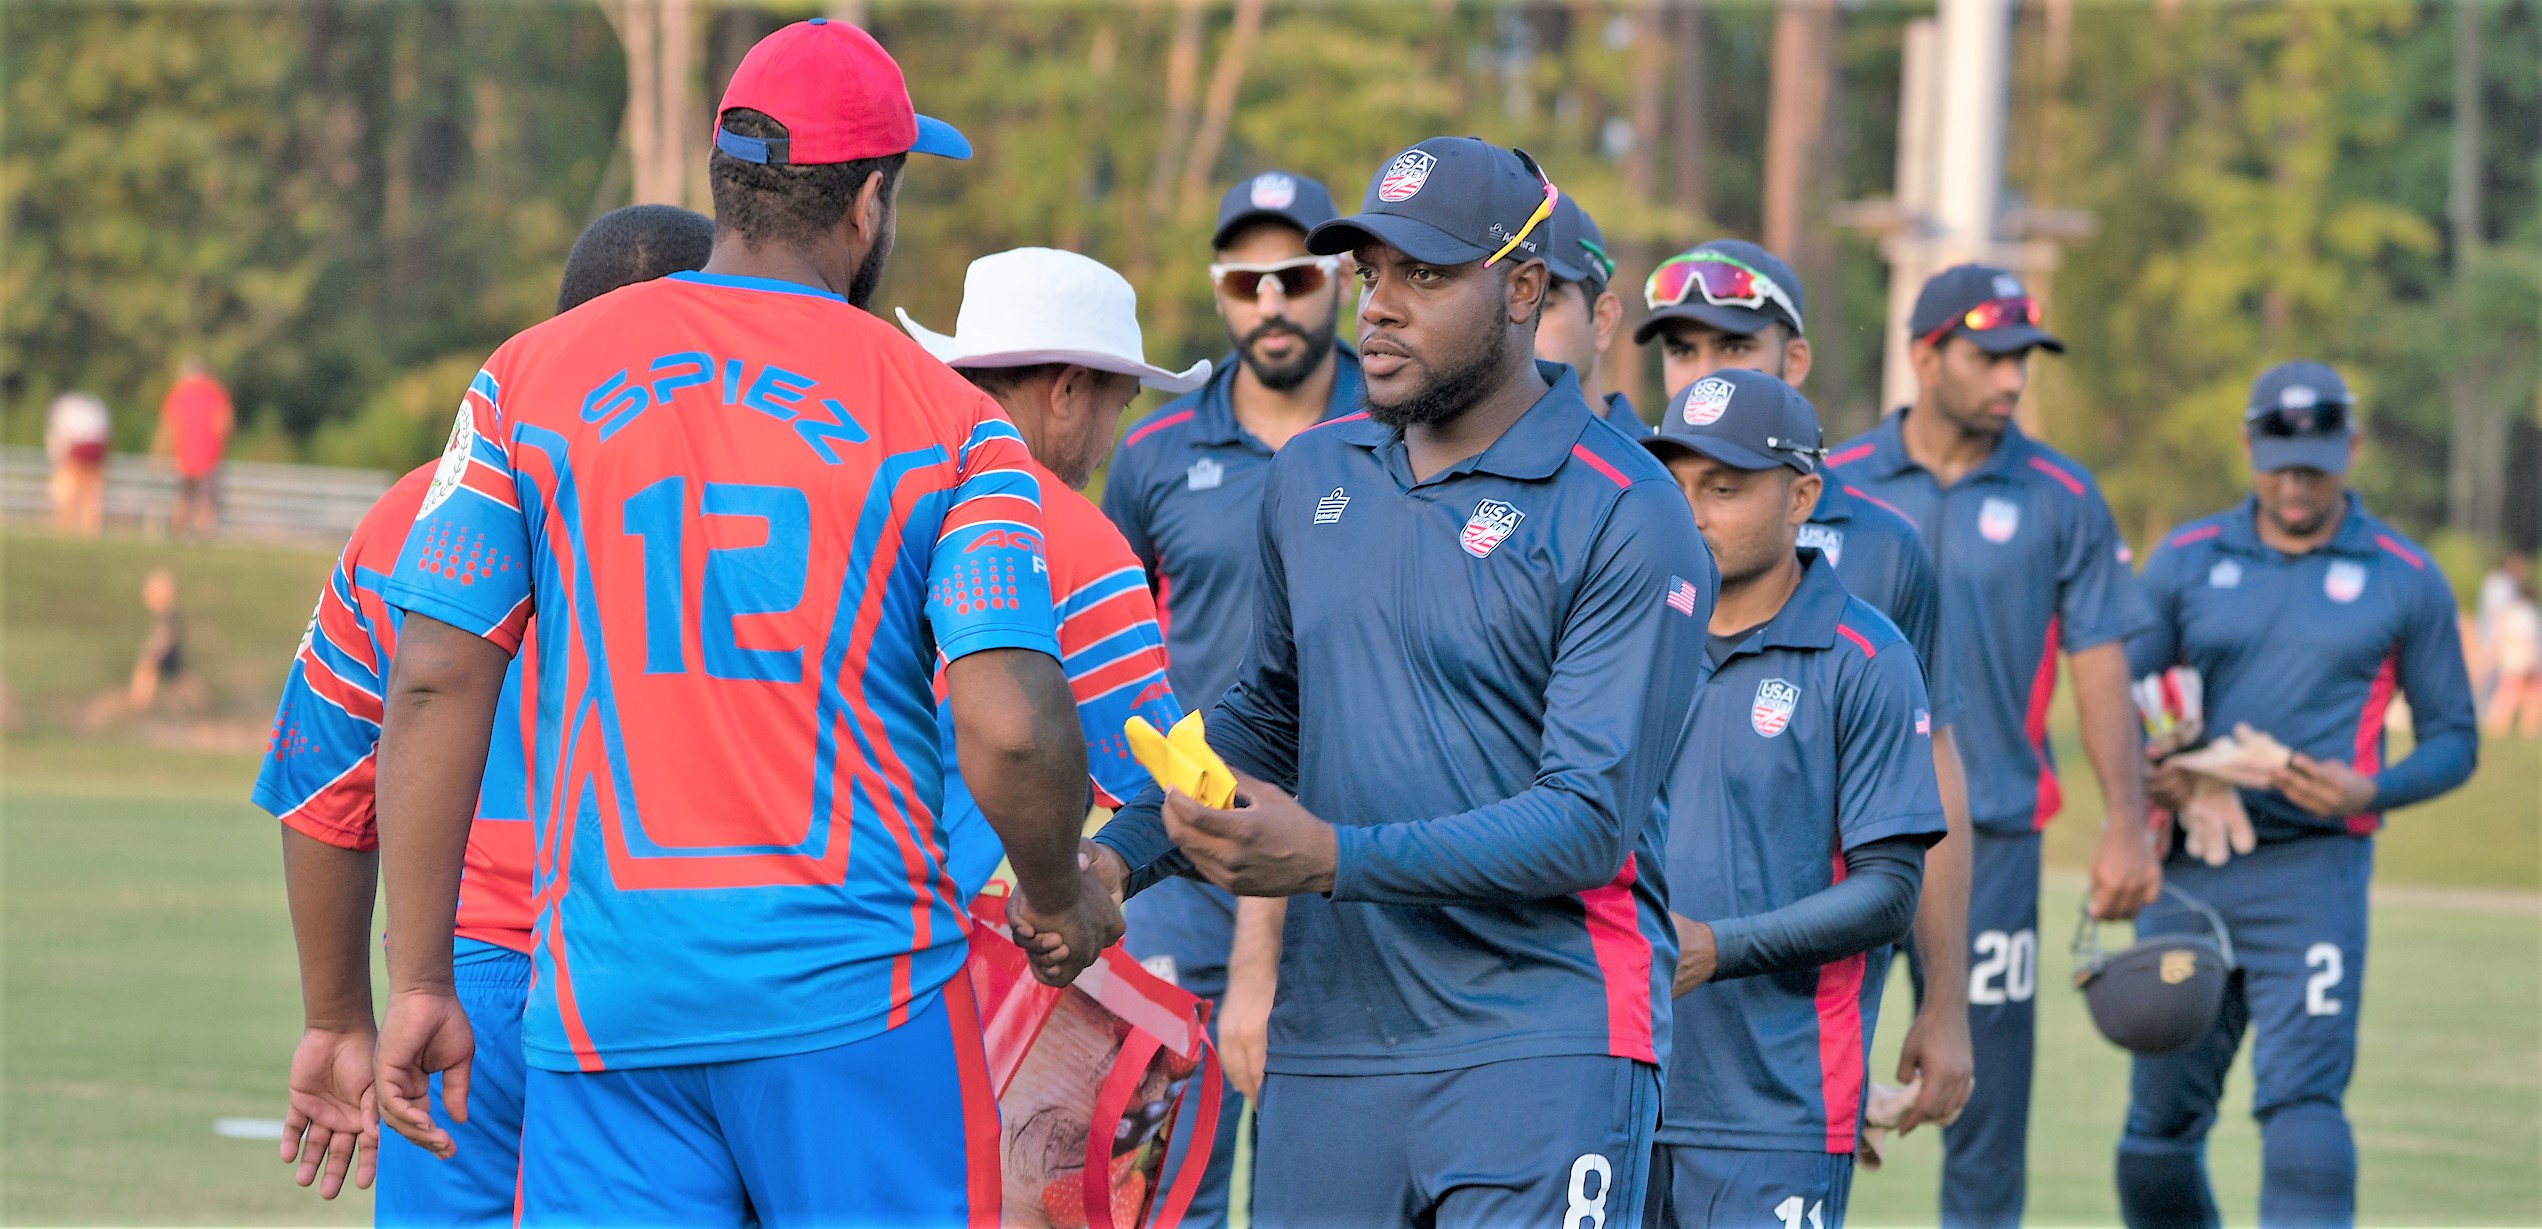 Journey to start in Canada for Team USA as ICC Qualification to Men’s T20 World Cup 2022 in Australia confirmed